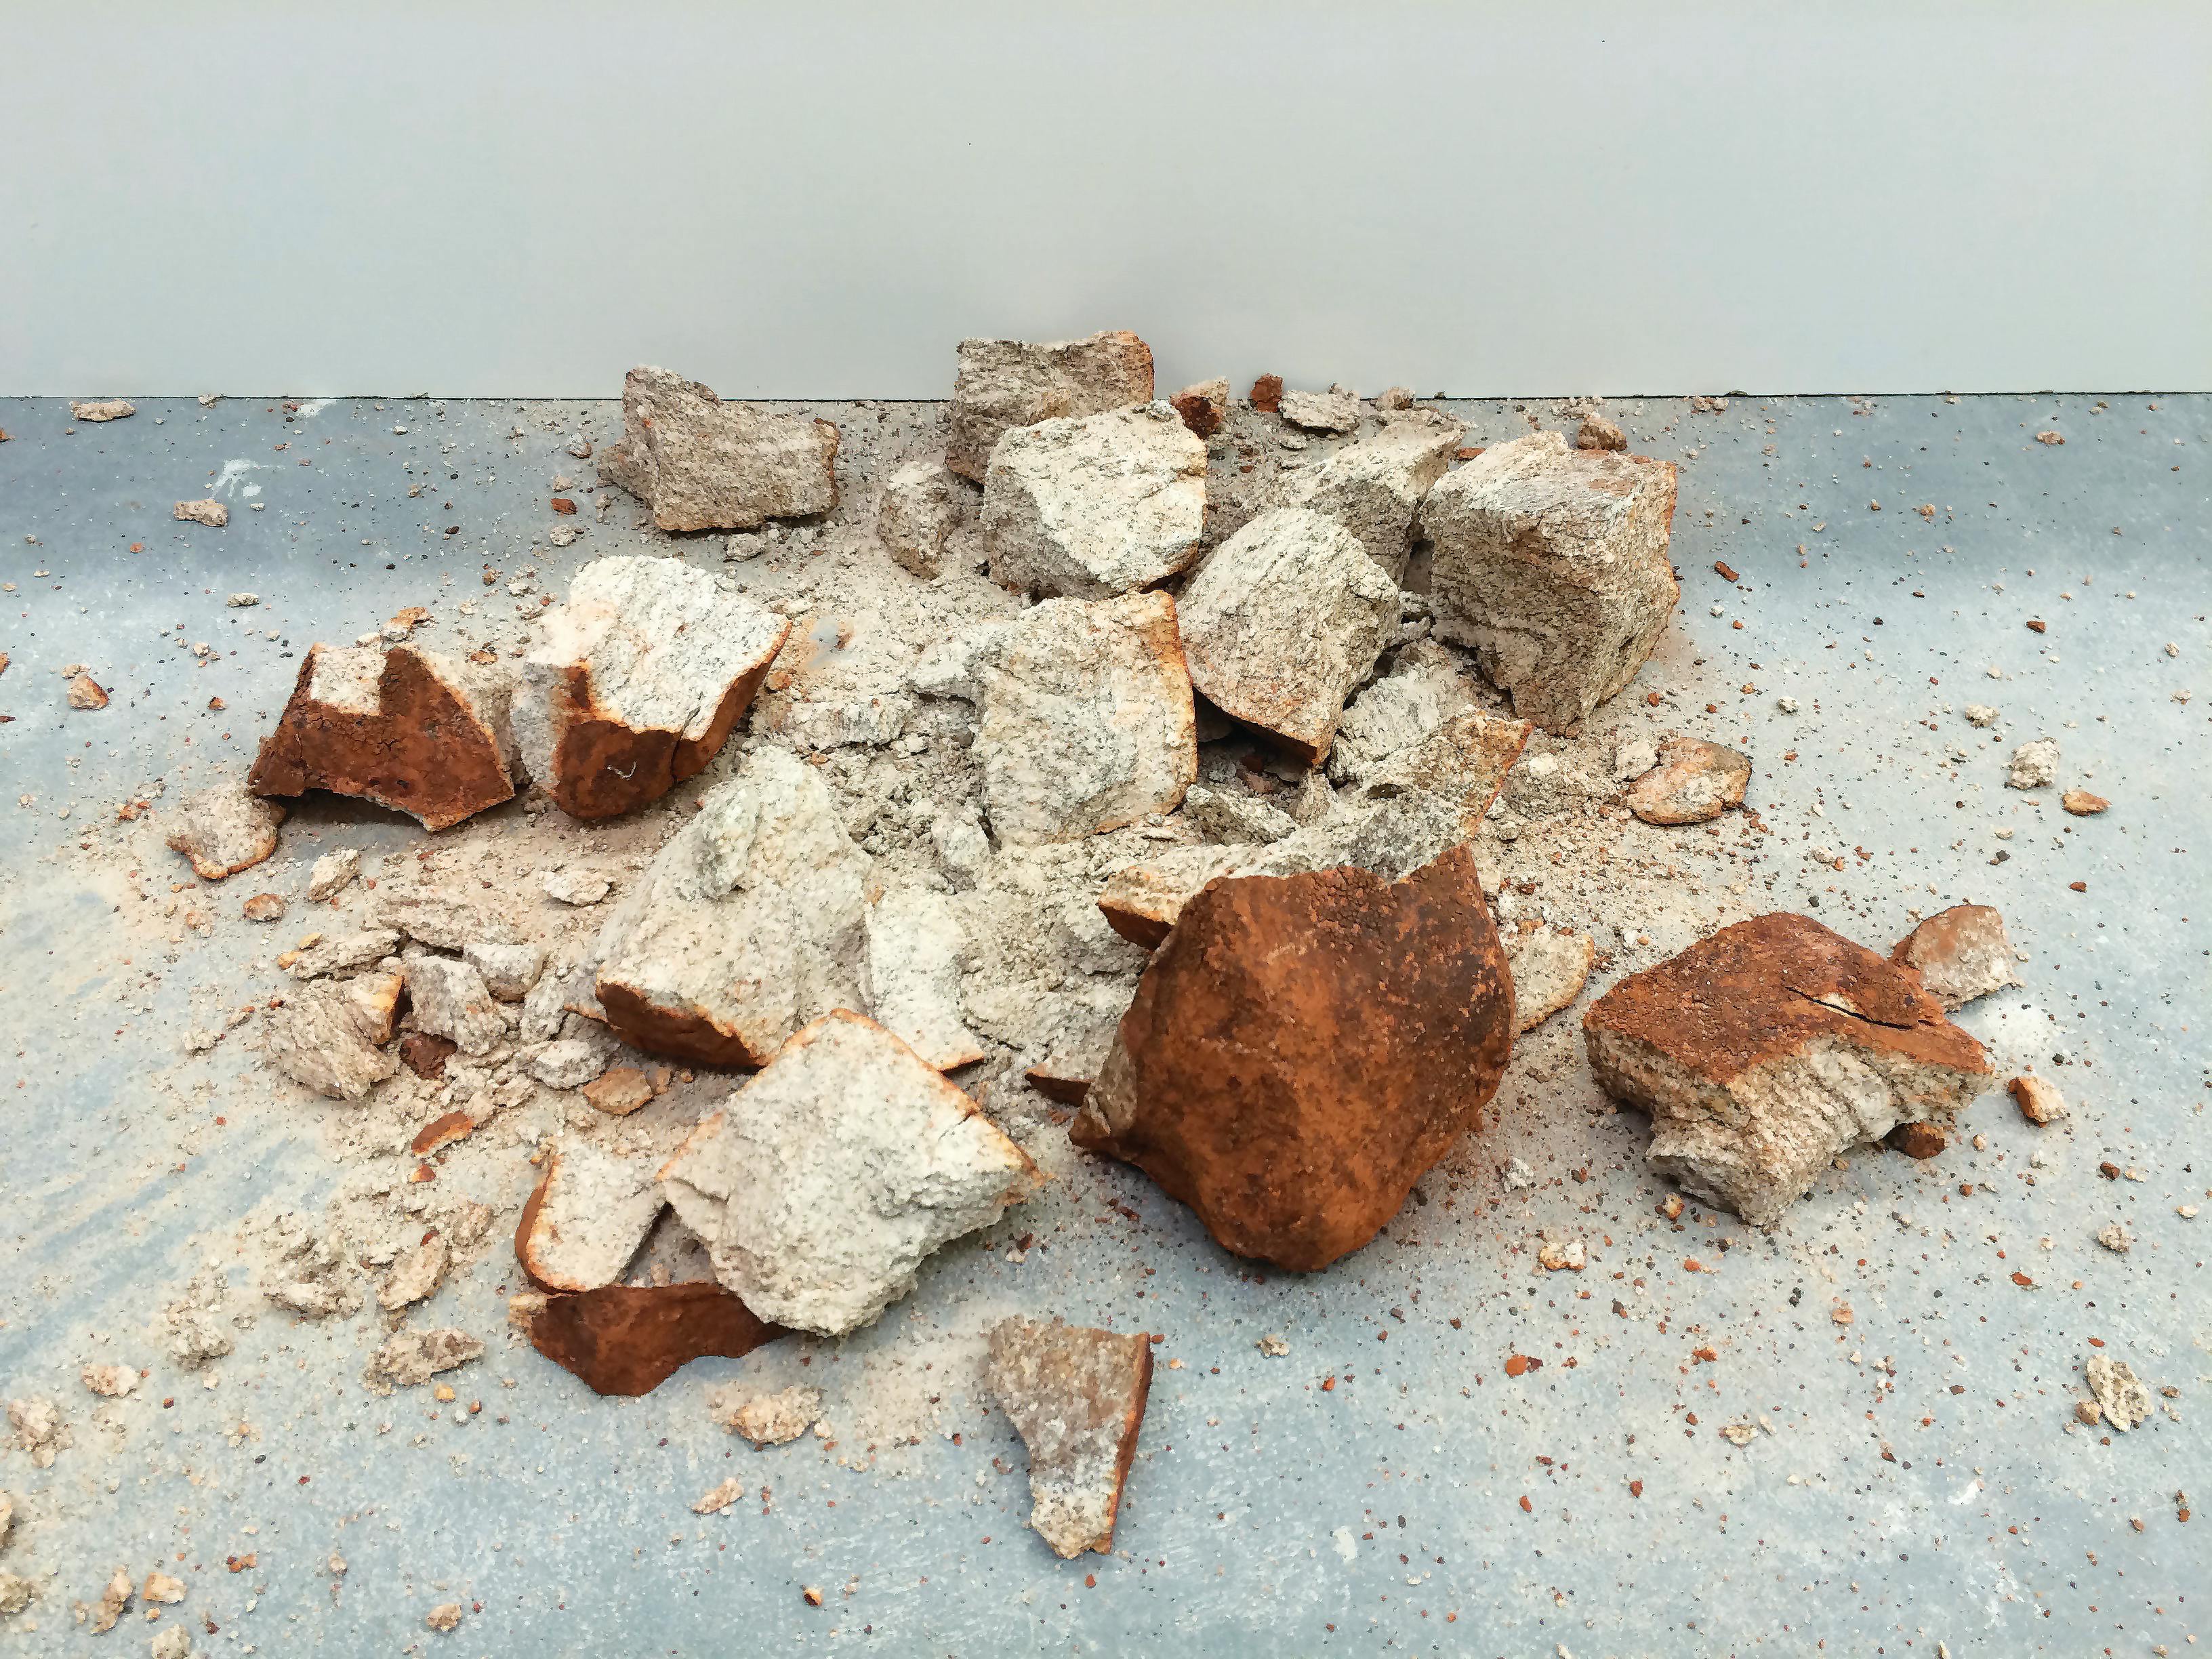 a large stone smashed into crumbly sandy pieces